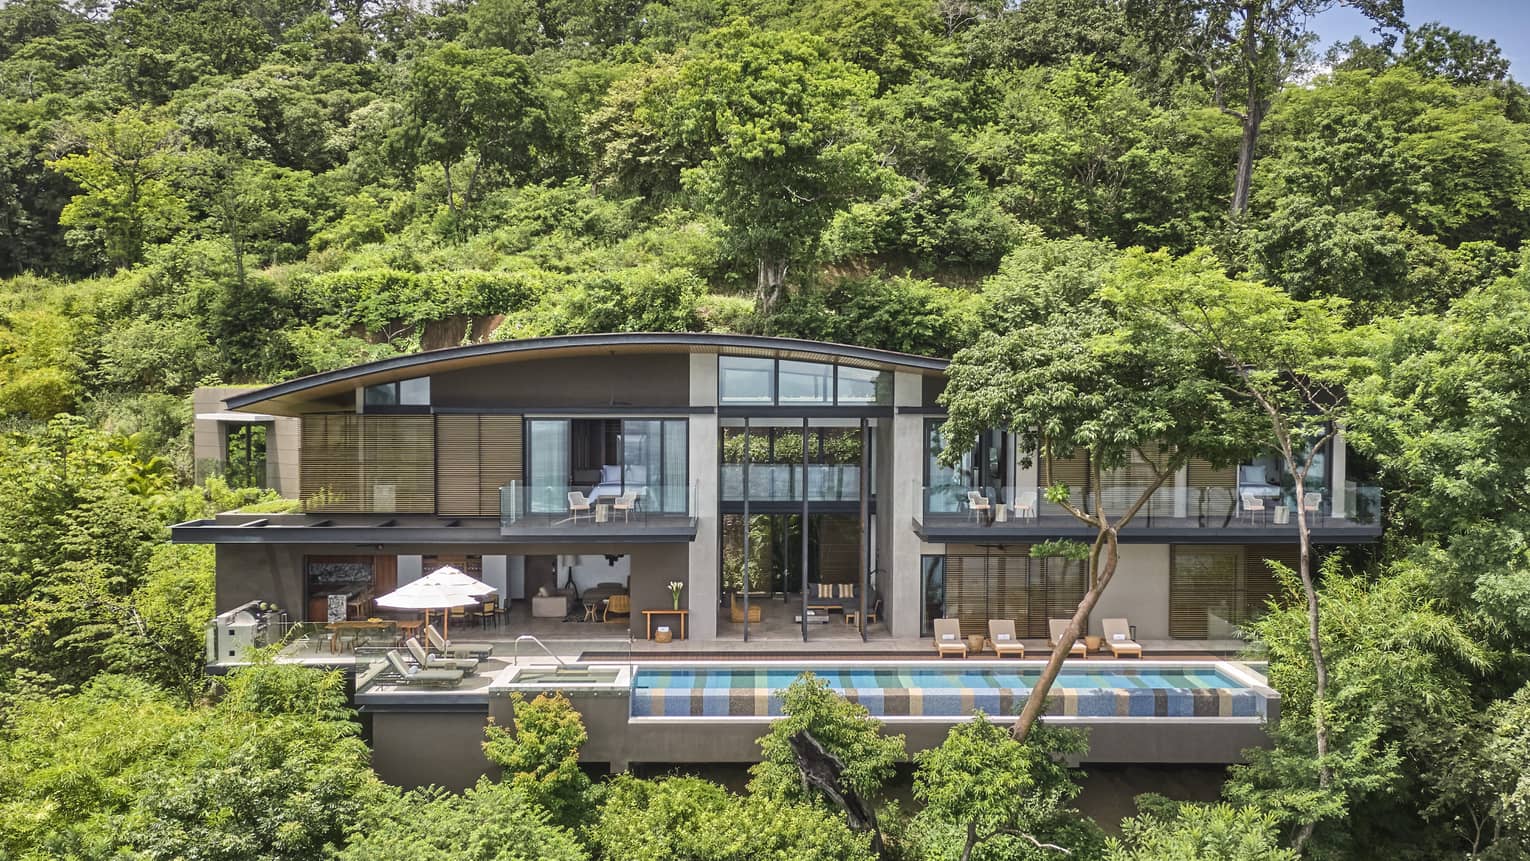 Exterior of private villa nestled in the trees with long rectangular pool